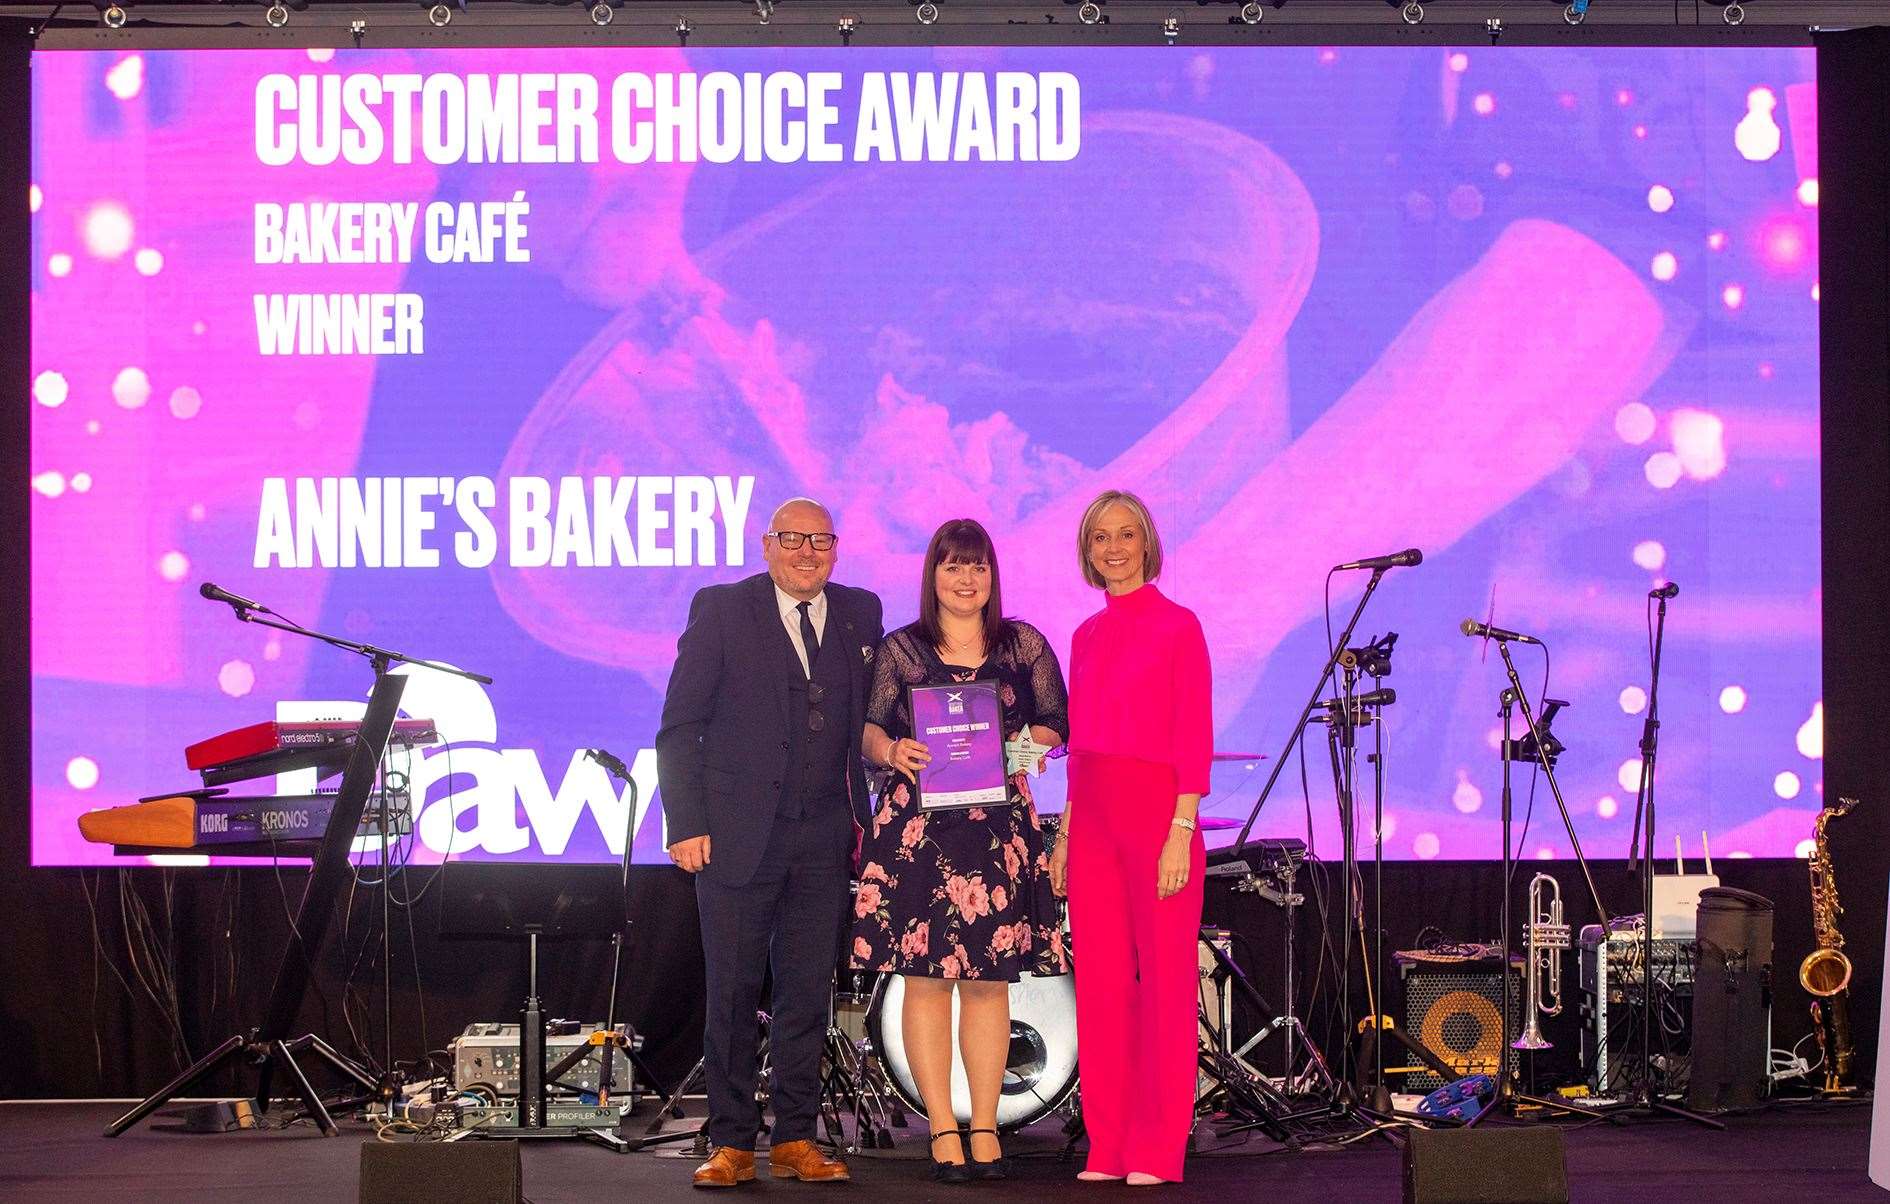 Annie Body with her best cafe bakery award